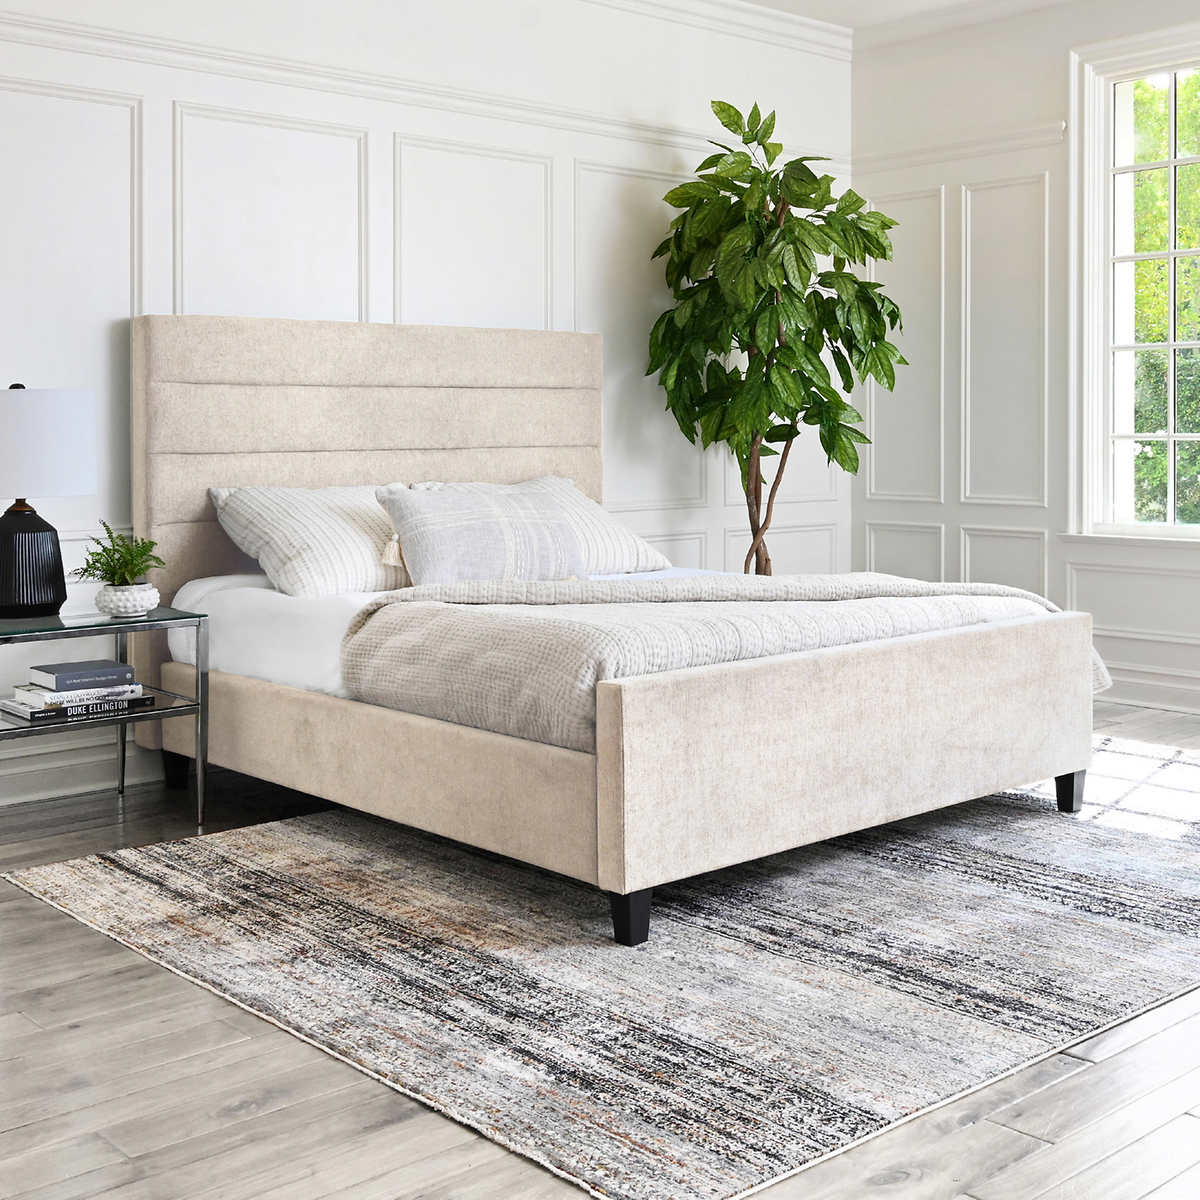 Athena Upholstered King Bed   Costco